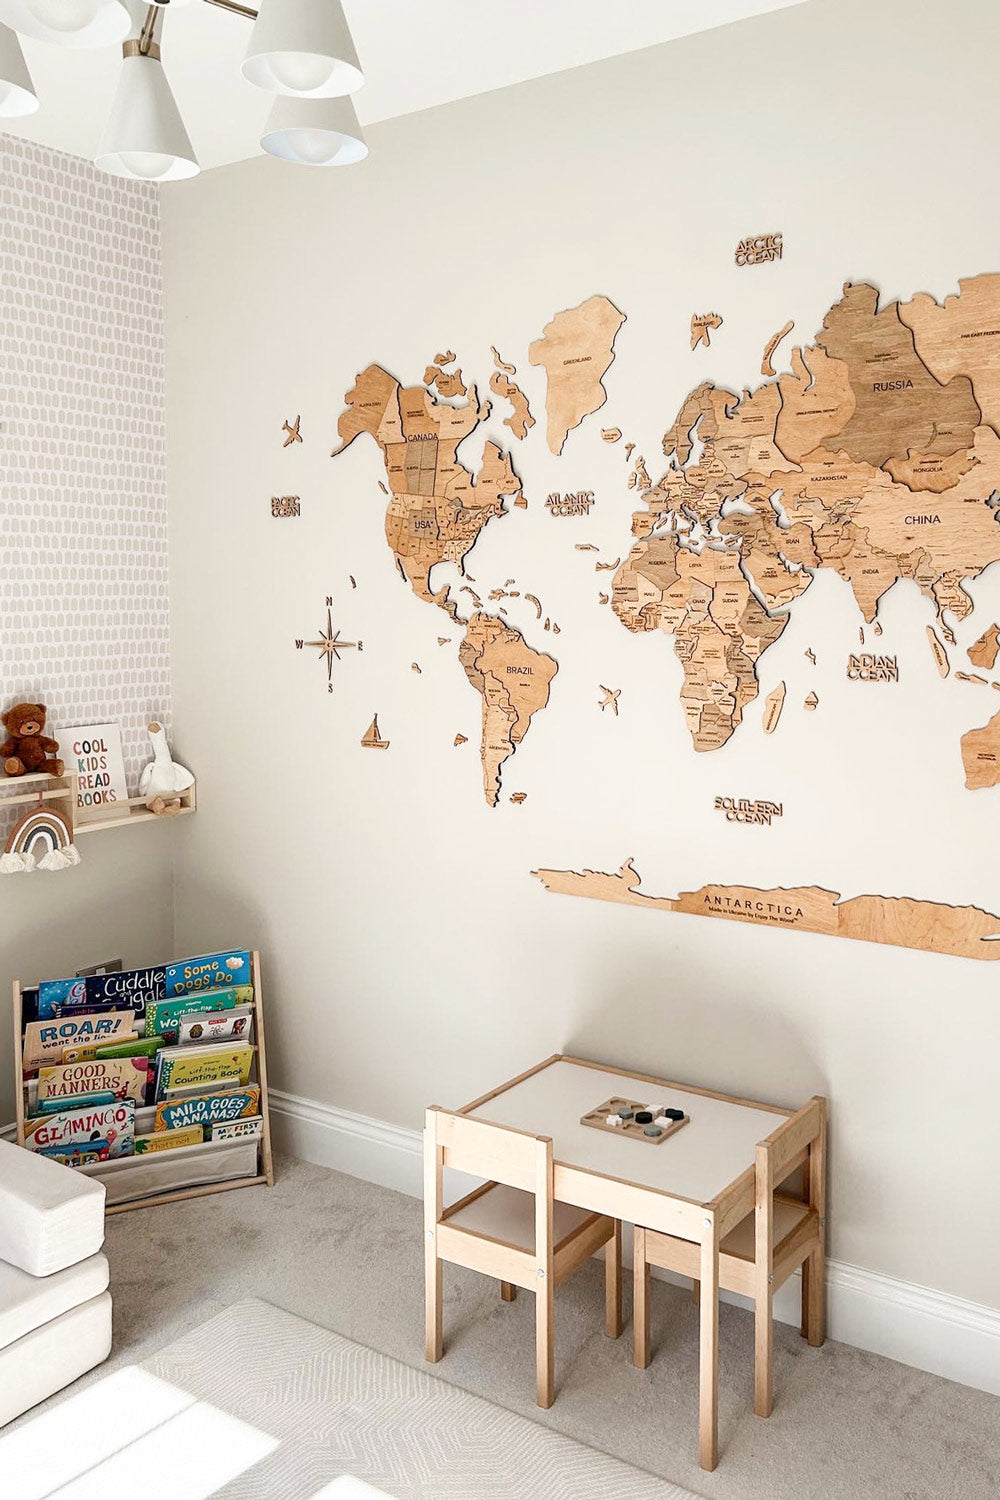 Wallpaper suitable for kids room interiors